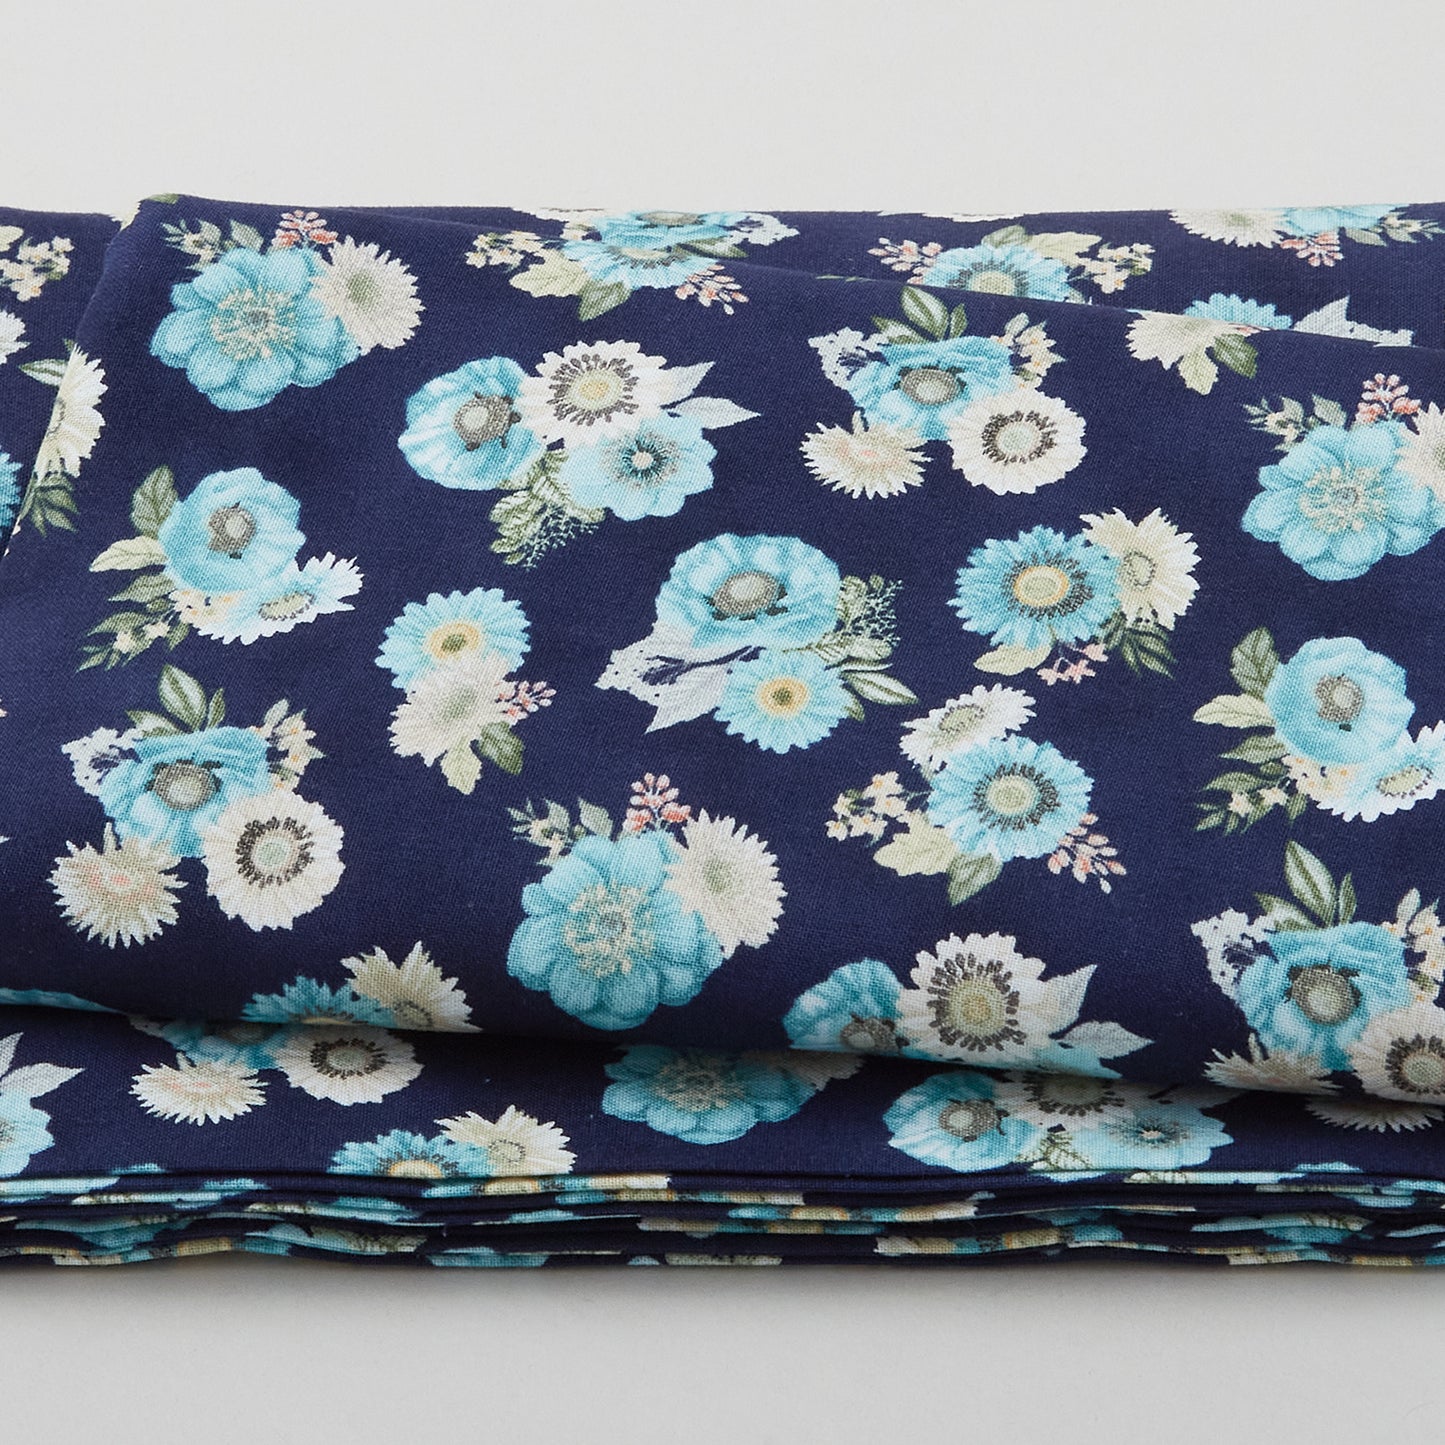 Blissful - Floral Toss Navy 3 Yard Cut Primary Image